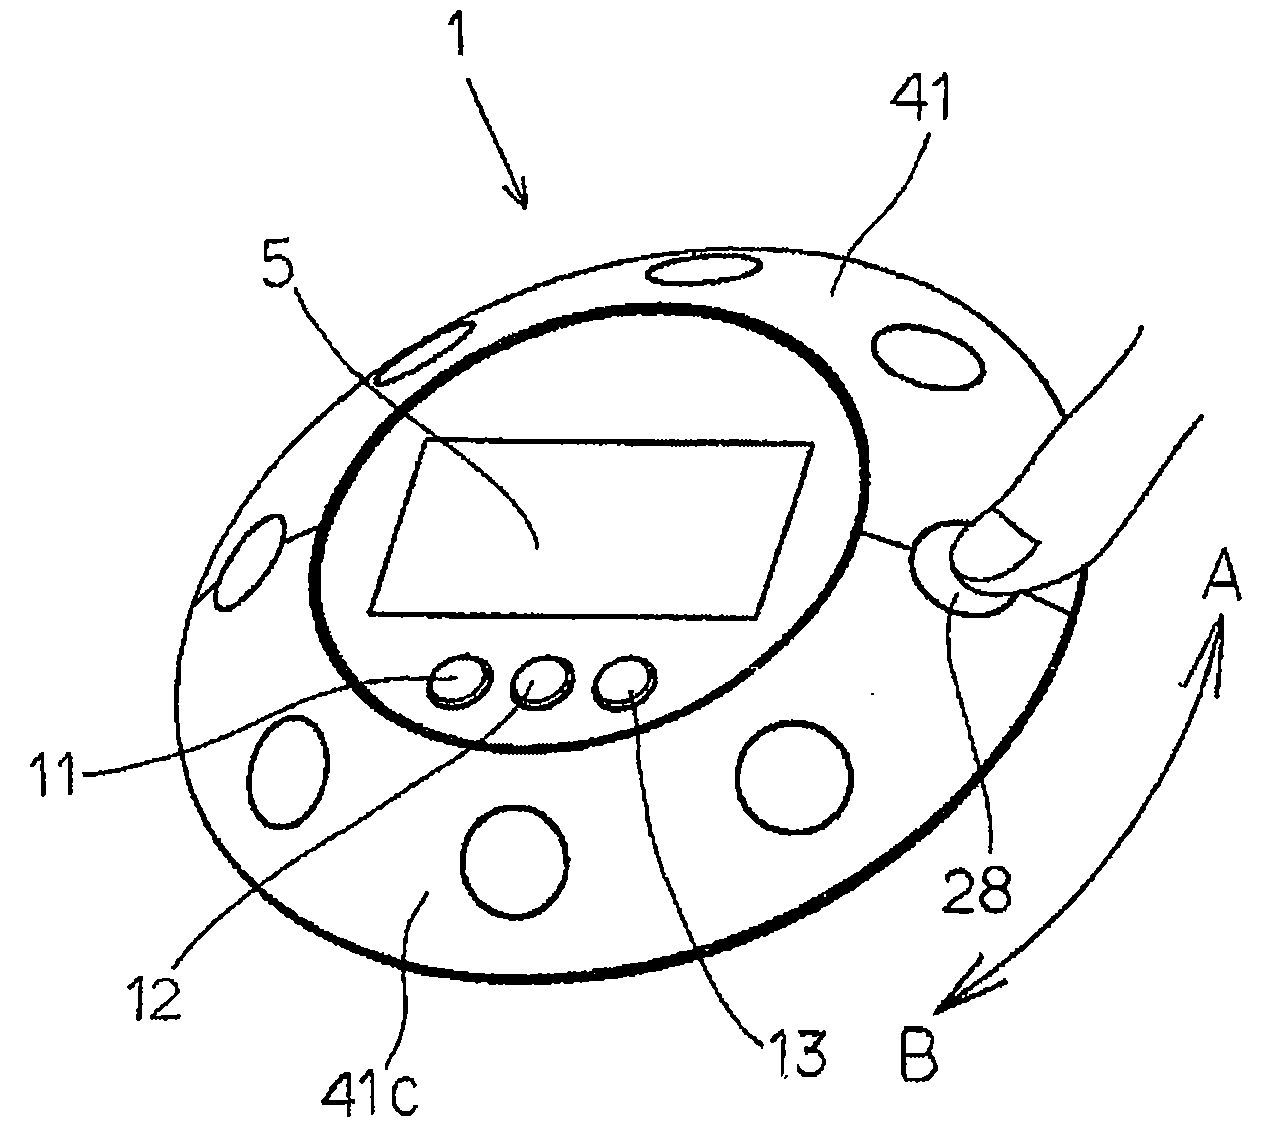 Stationary remote control transmitting device